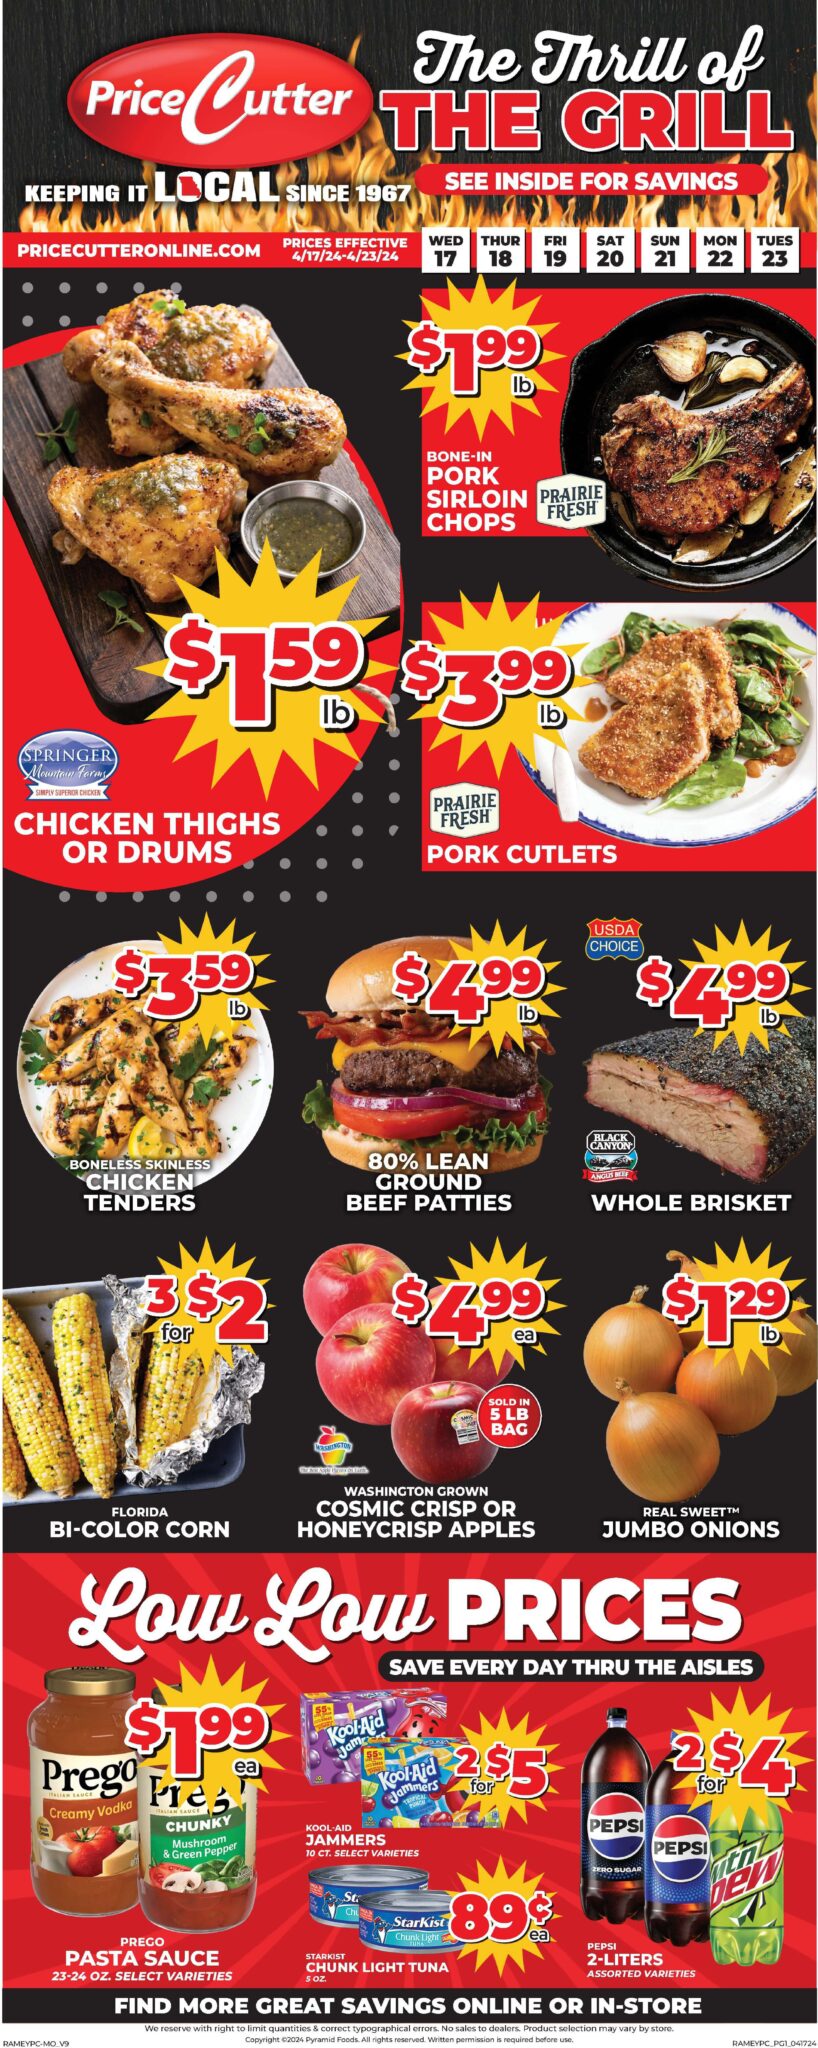 Price Cutter Weekly Flyer